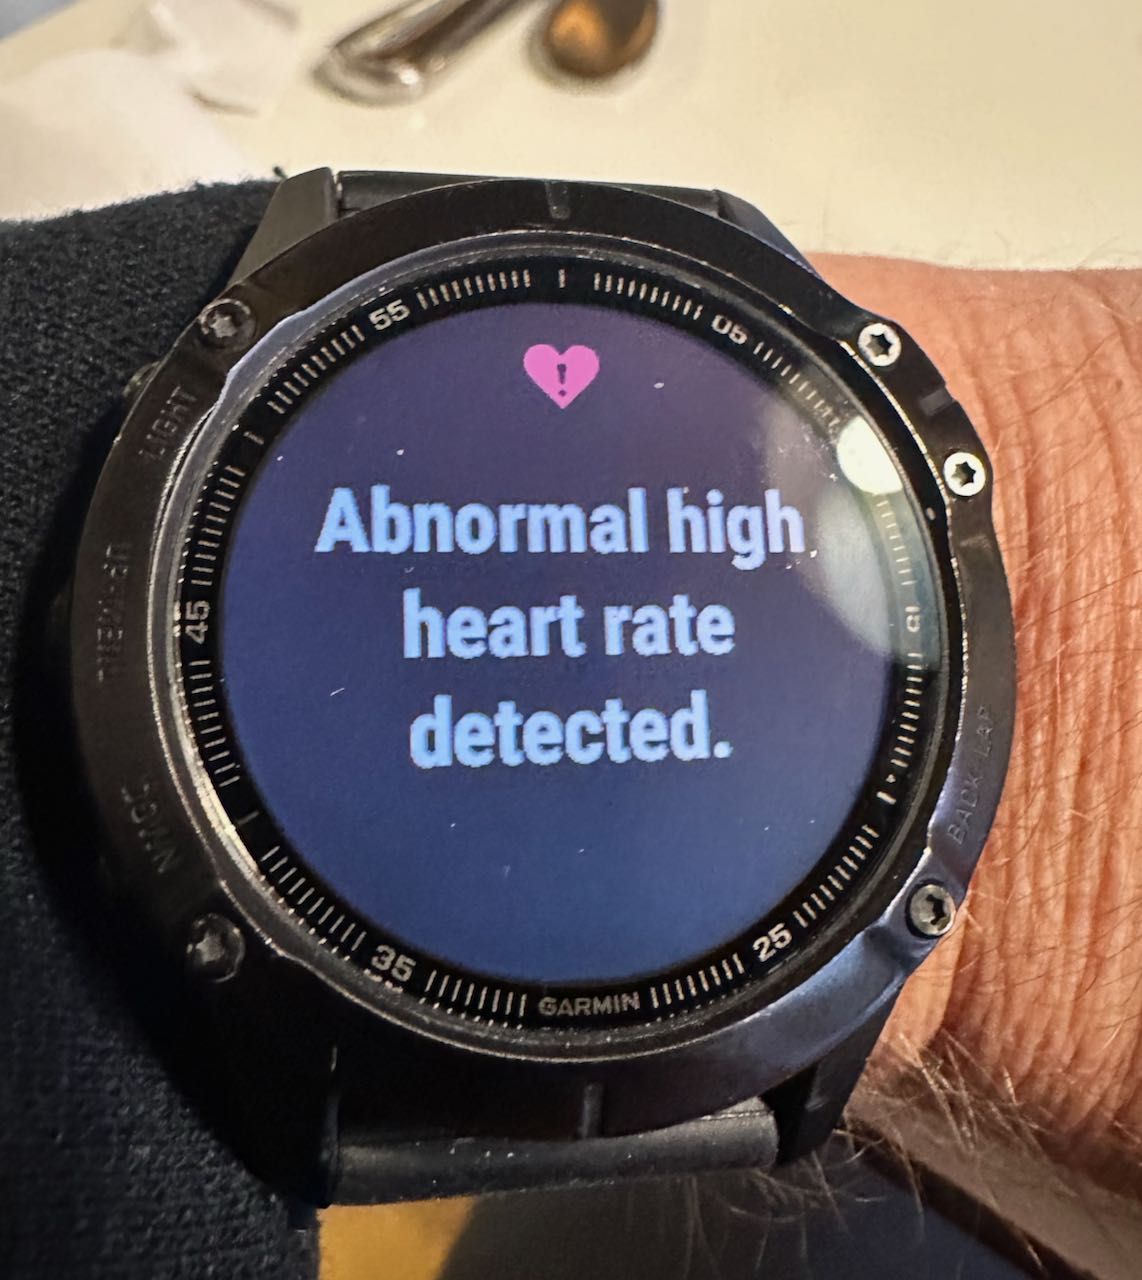 Abnormal heart rate detection on my watch (it happens often when I run - some setting I think)